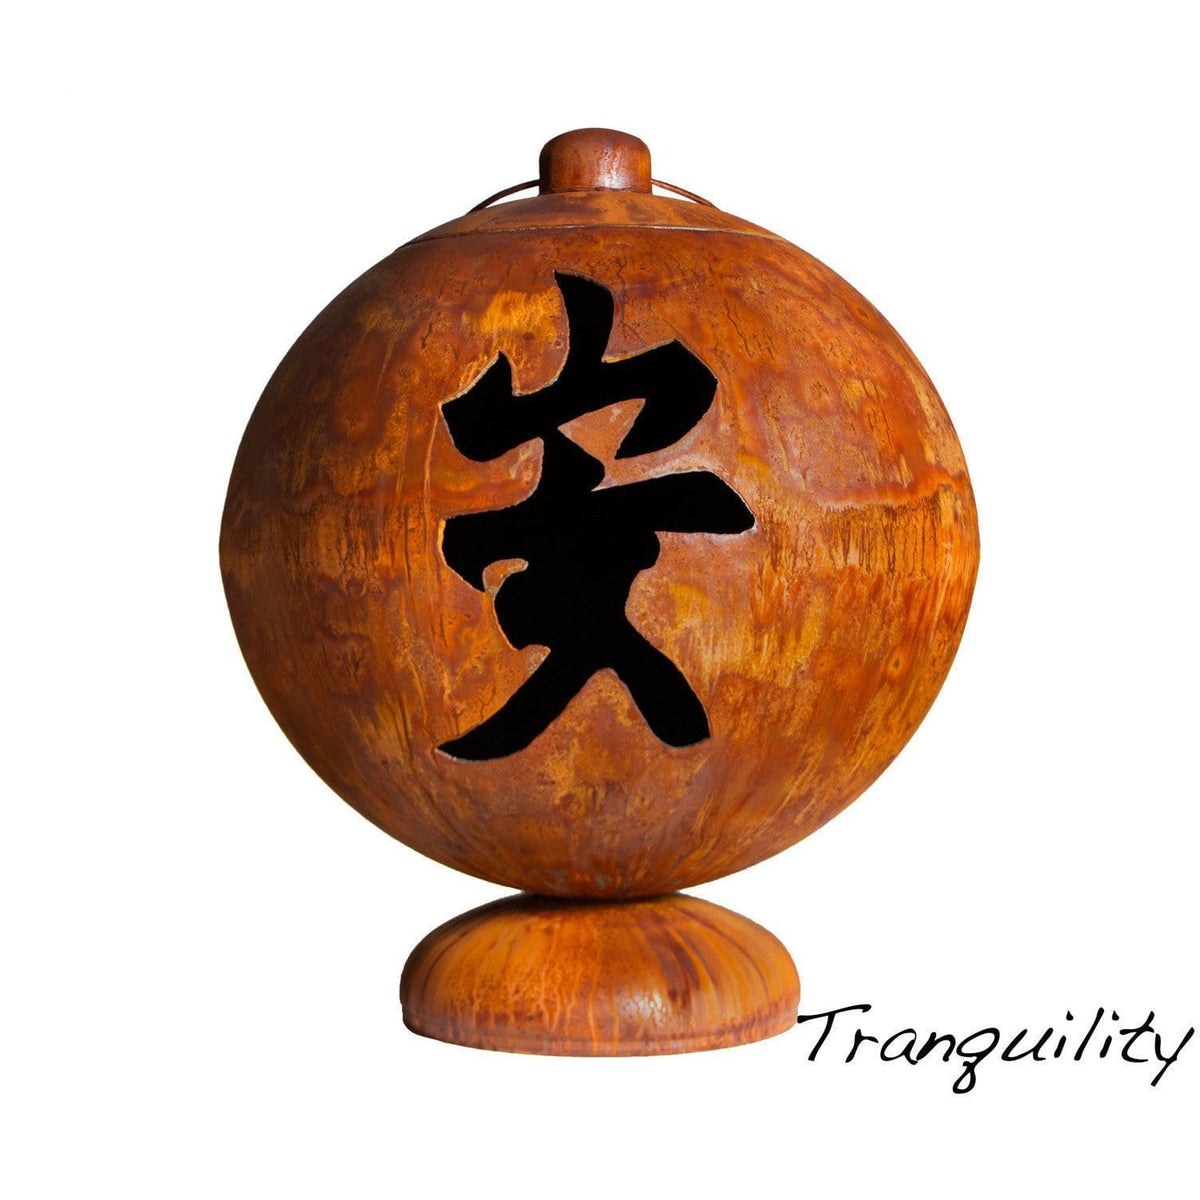 Ohio Flame-Fire Globe: &quot;Tranquility&quot;